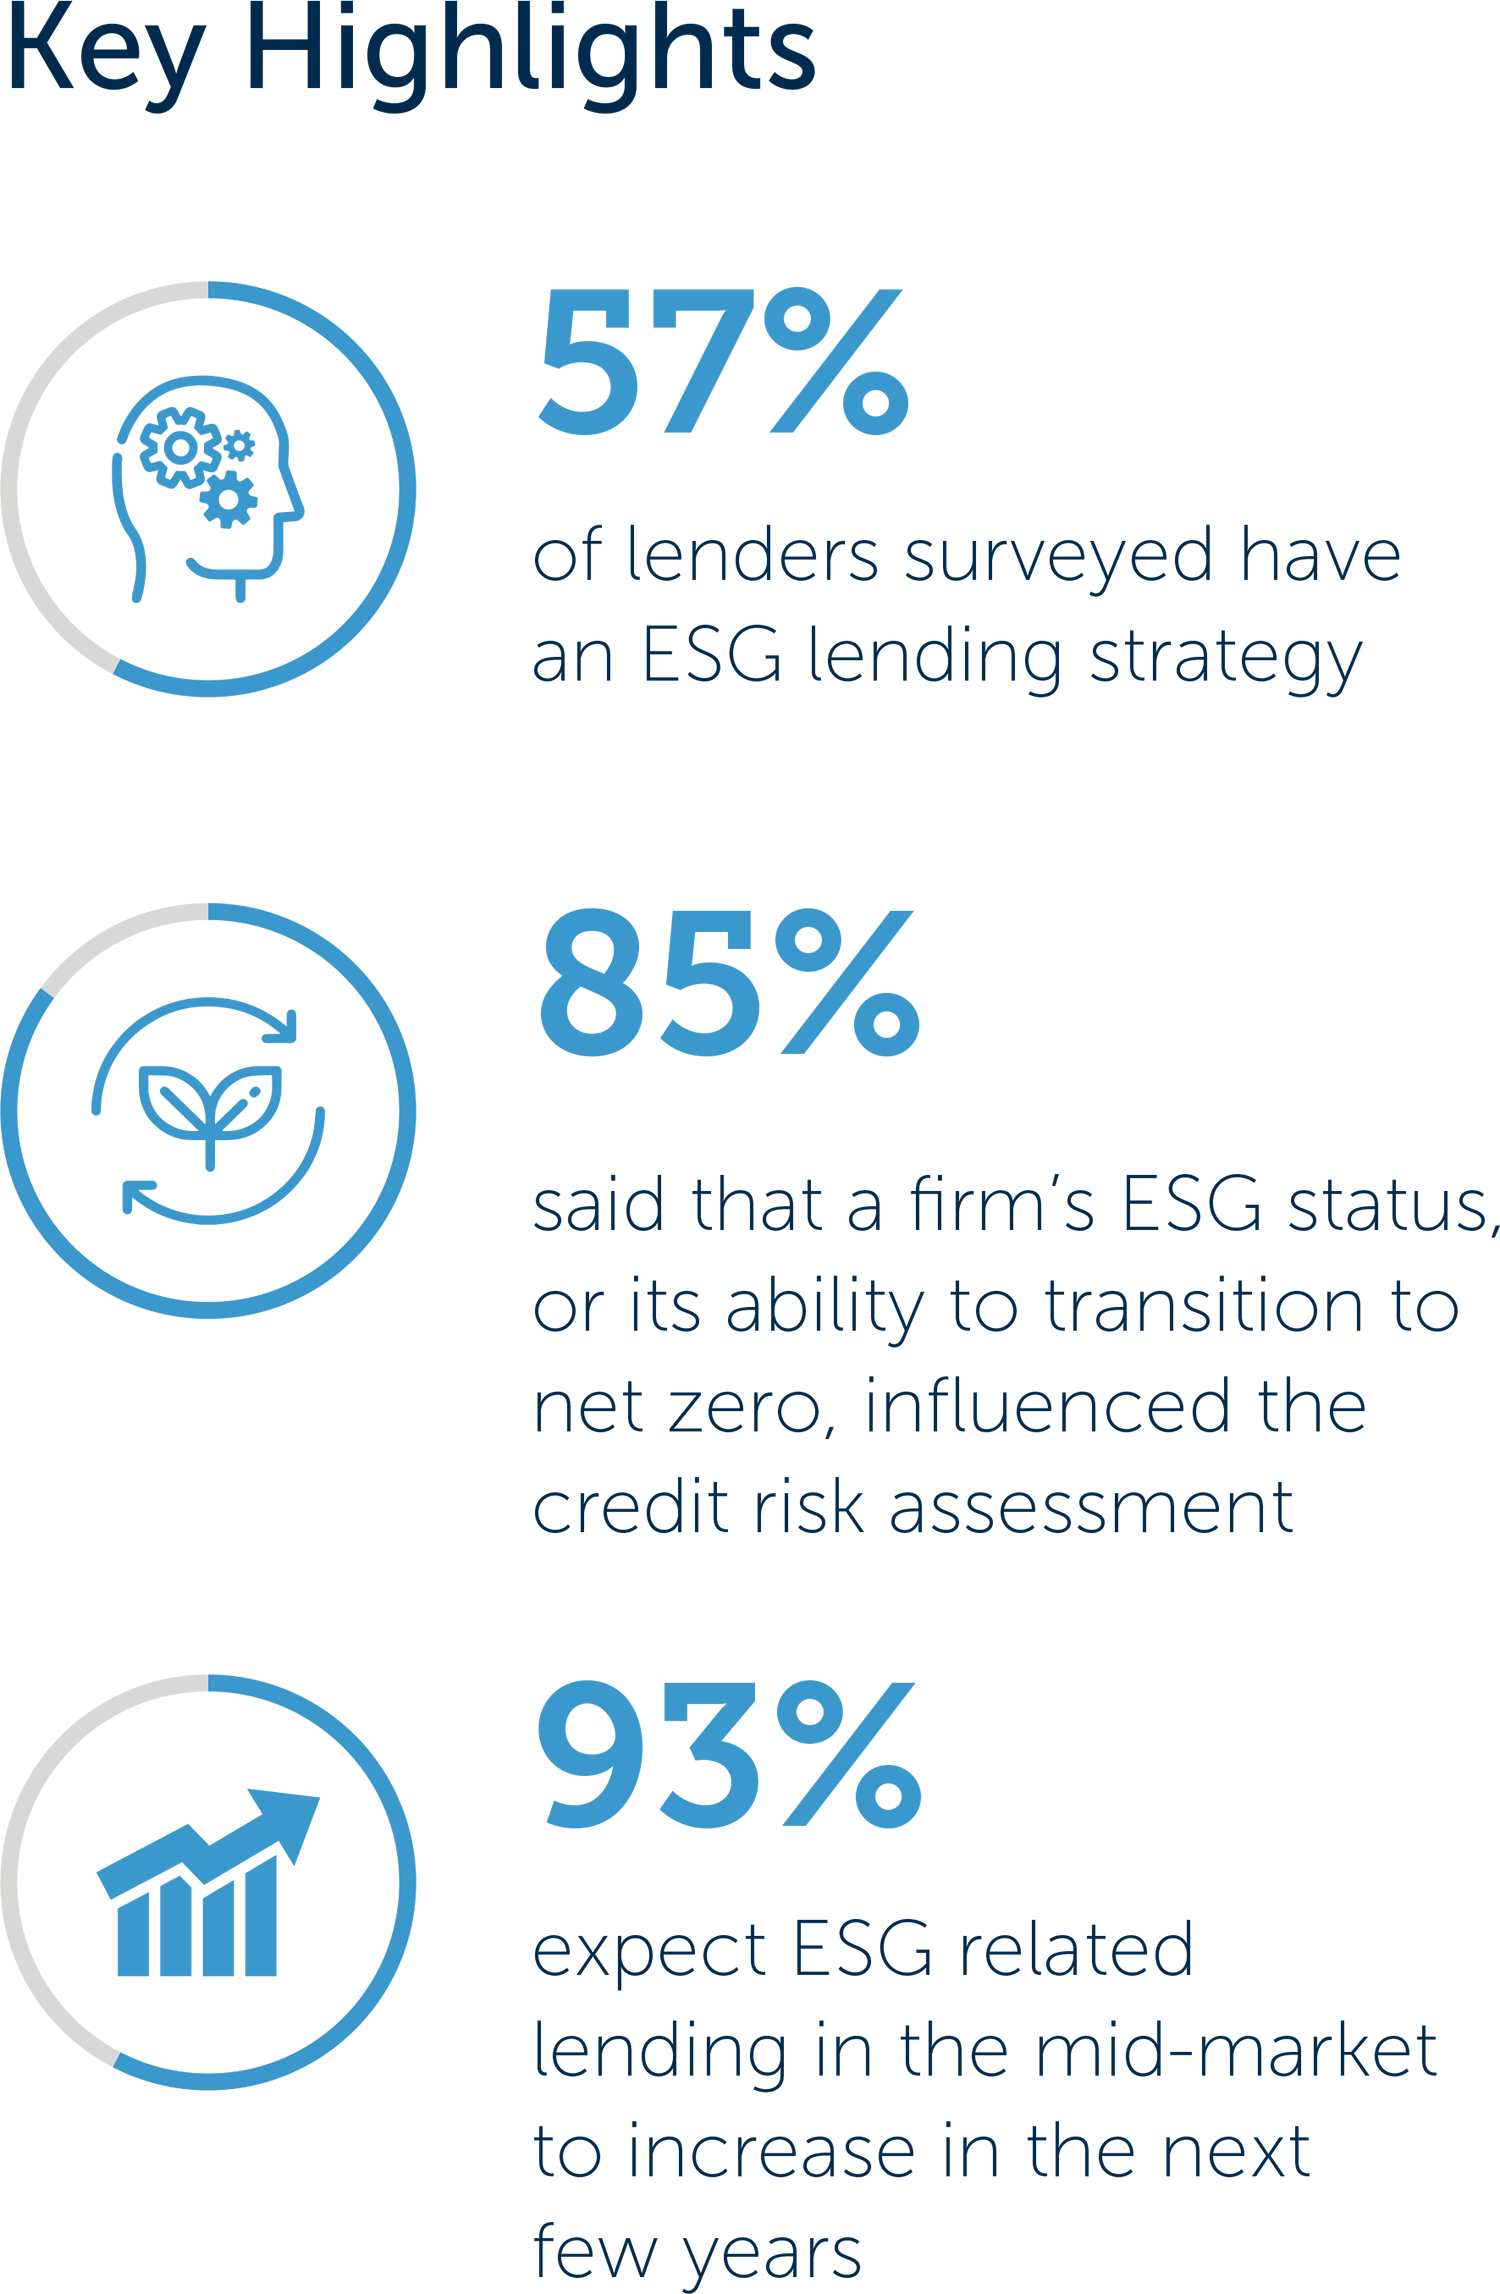 ESG and lending for the mid-market